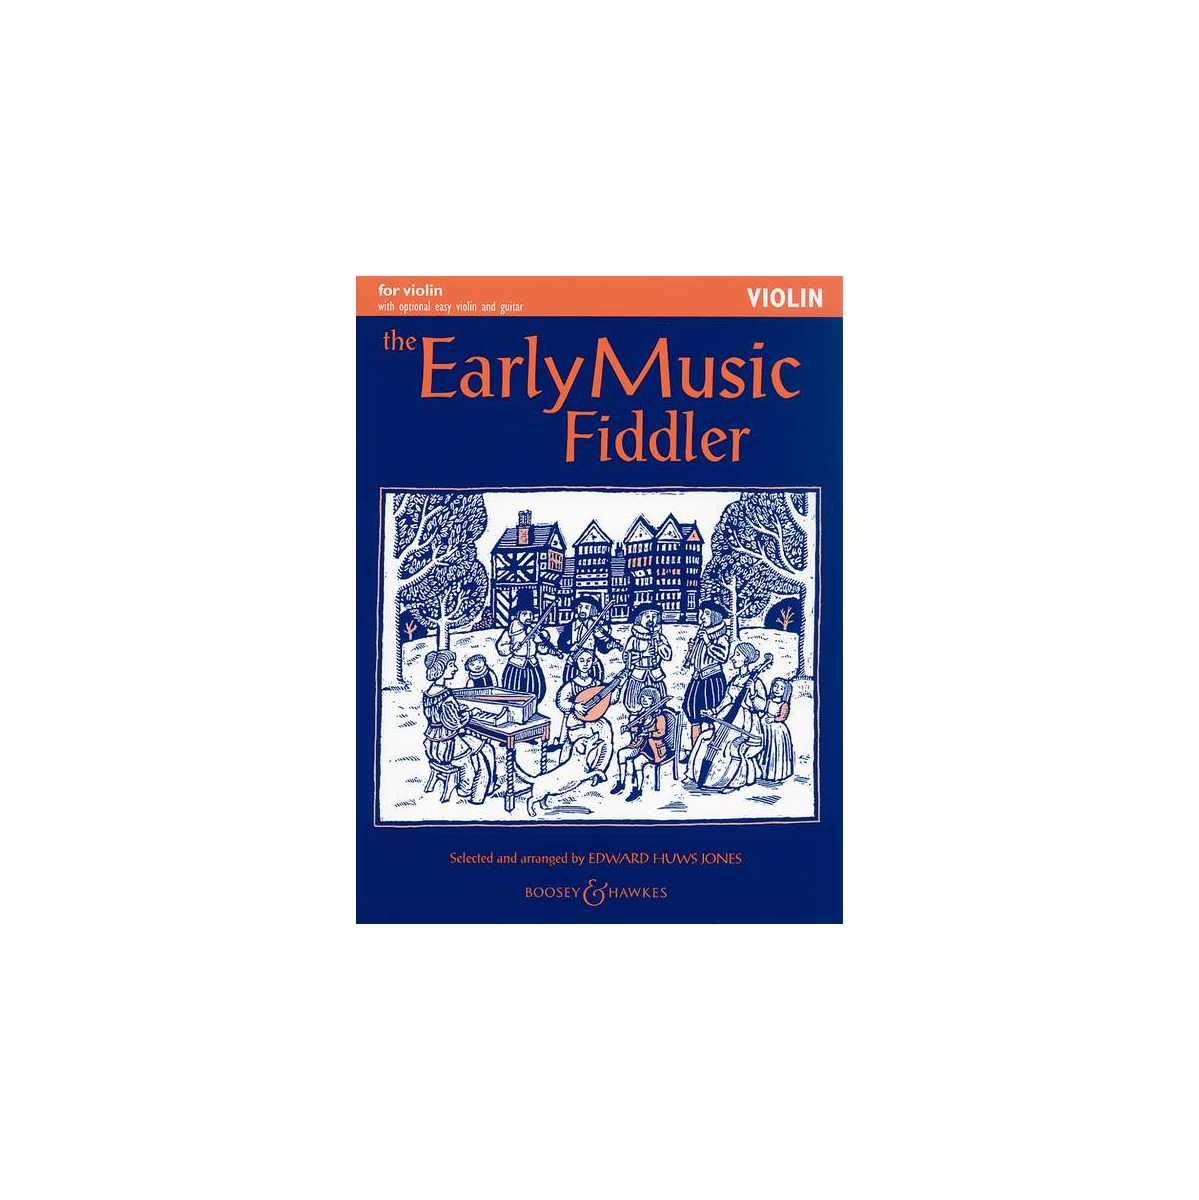 The Early Music Fiddler [Violin Part]